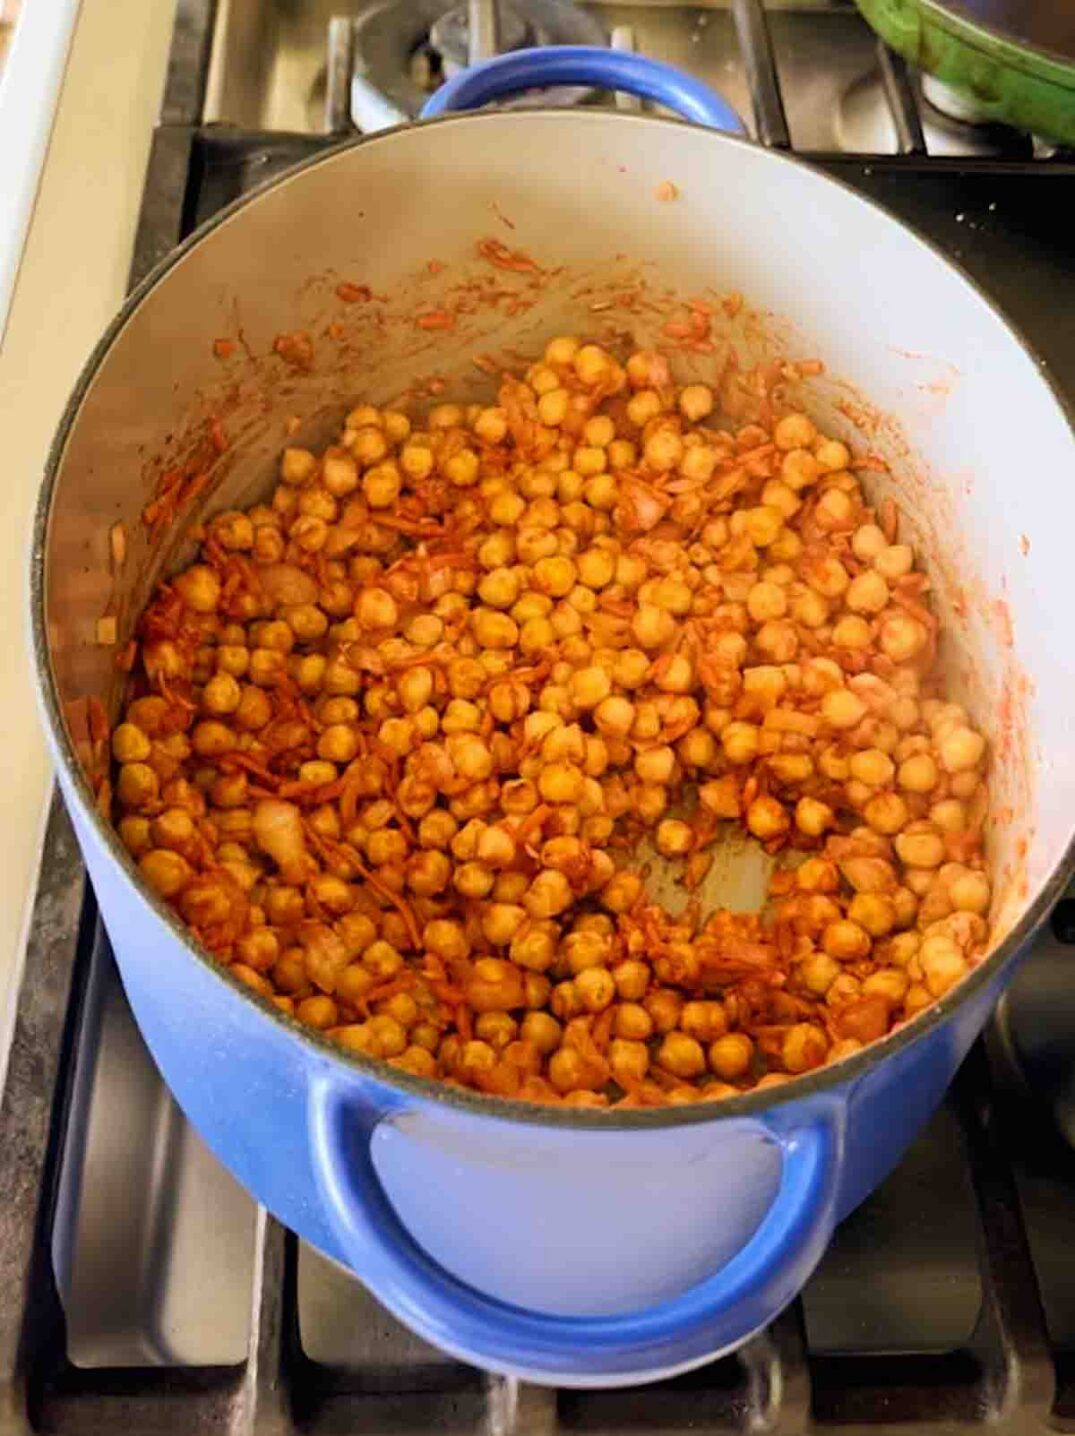 chickpeas tossed in tomato paste in a big blue pot.